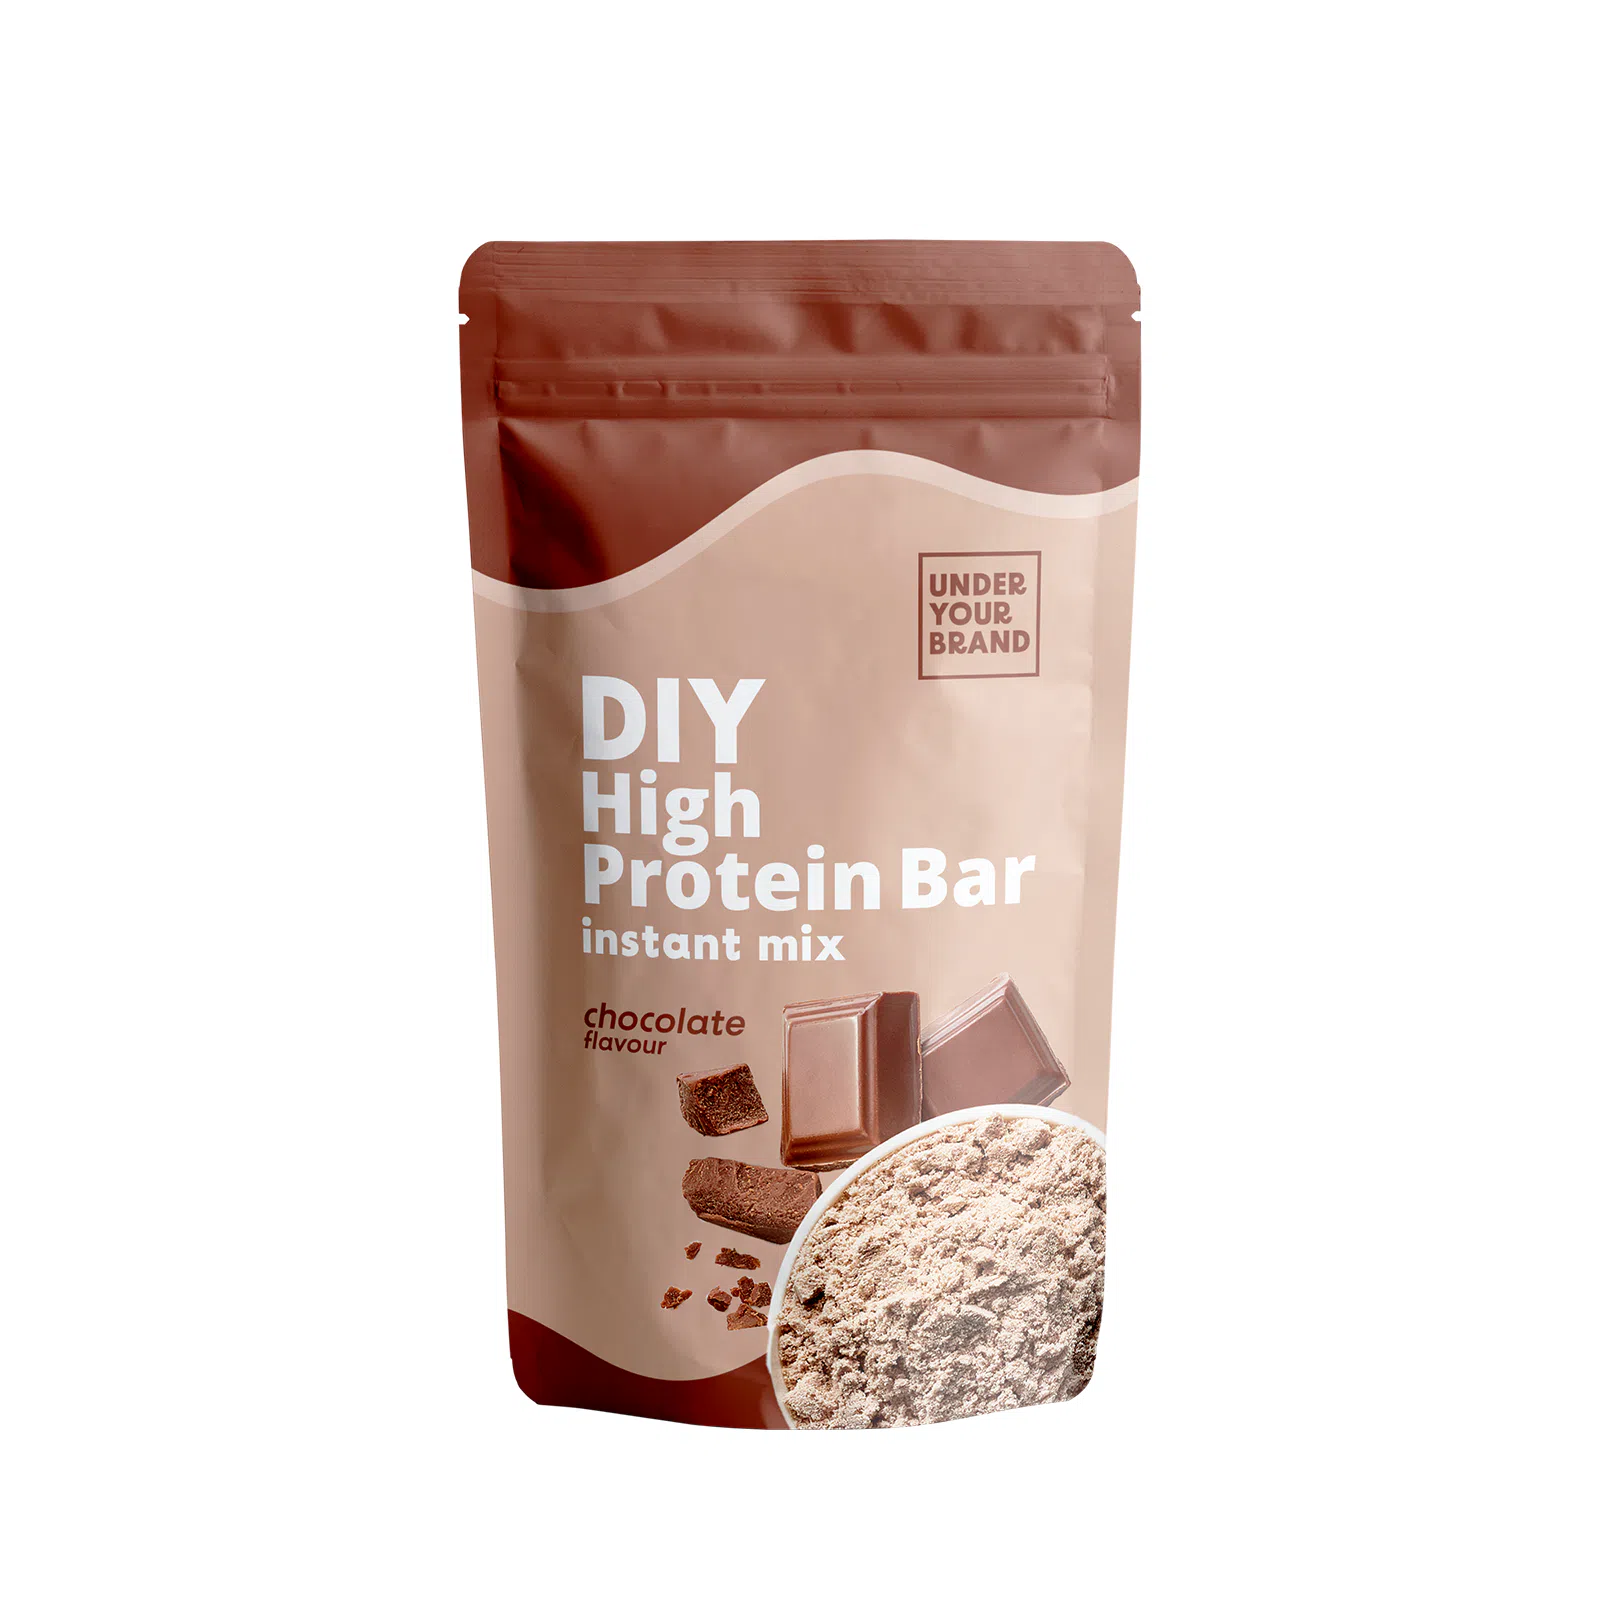 Amerpharma private label dyi high protein bar instant mix chocolate flavour in fully printed doypack